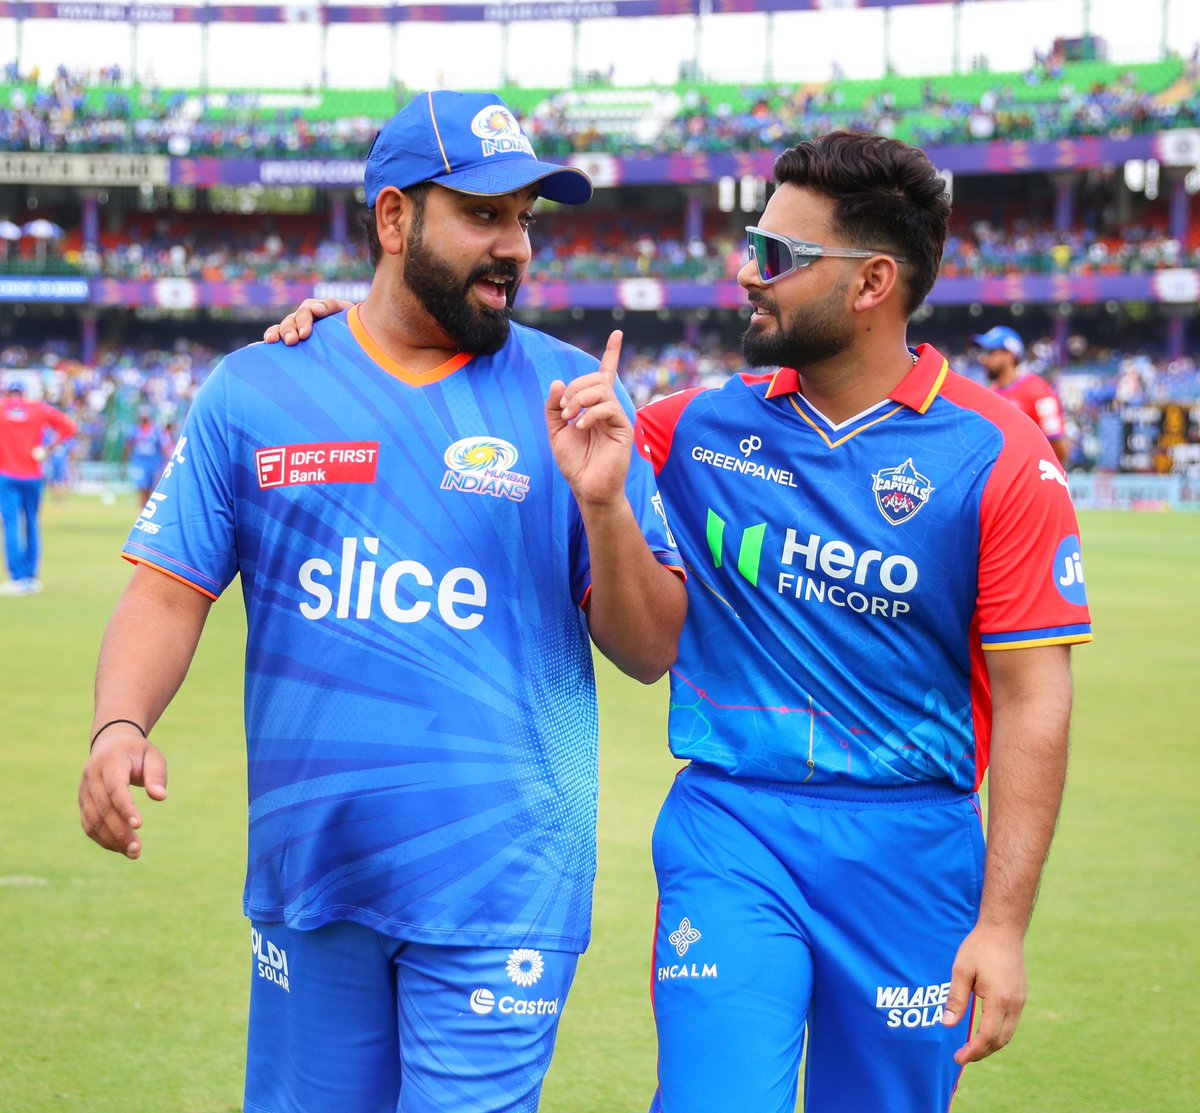 Rohit Sharma and Rishabh Pant together.

'The Indian bros' 🫂❤️!!